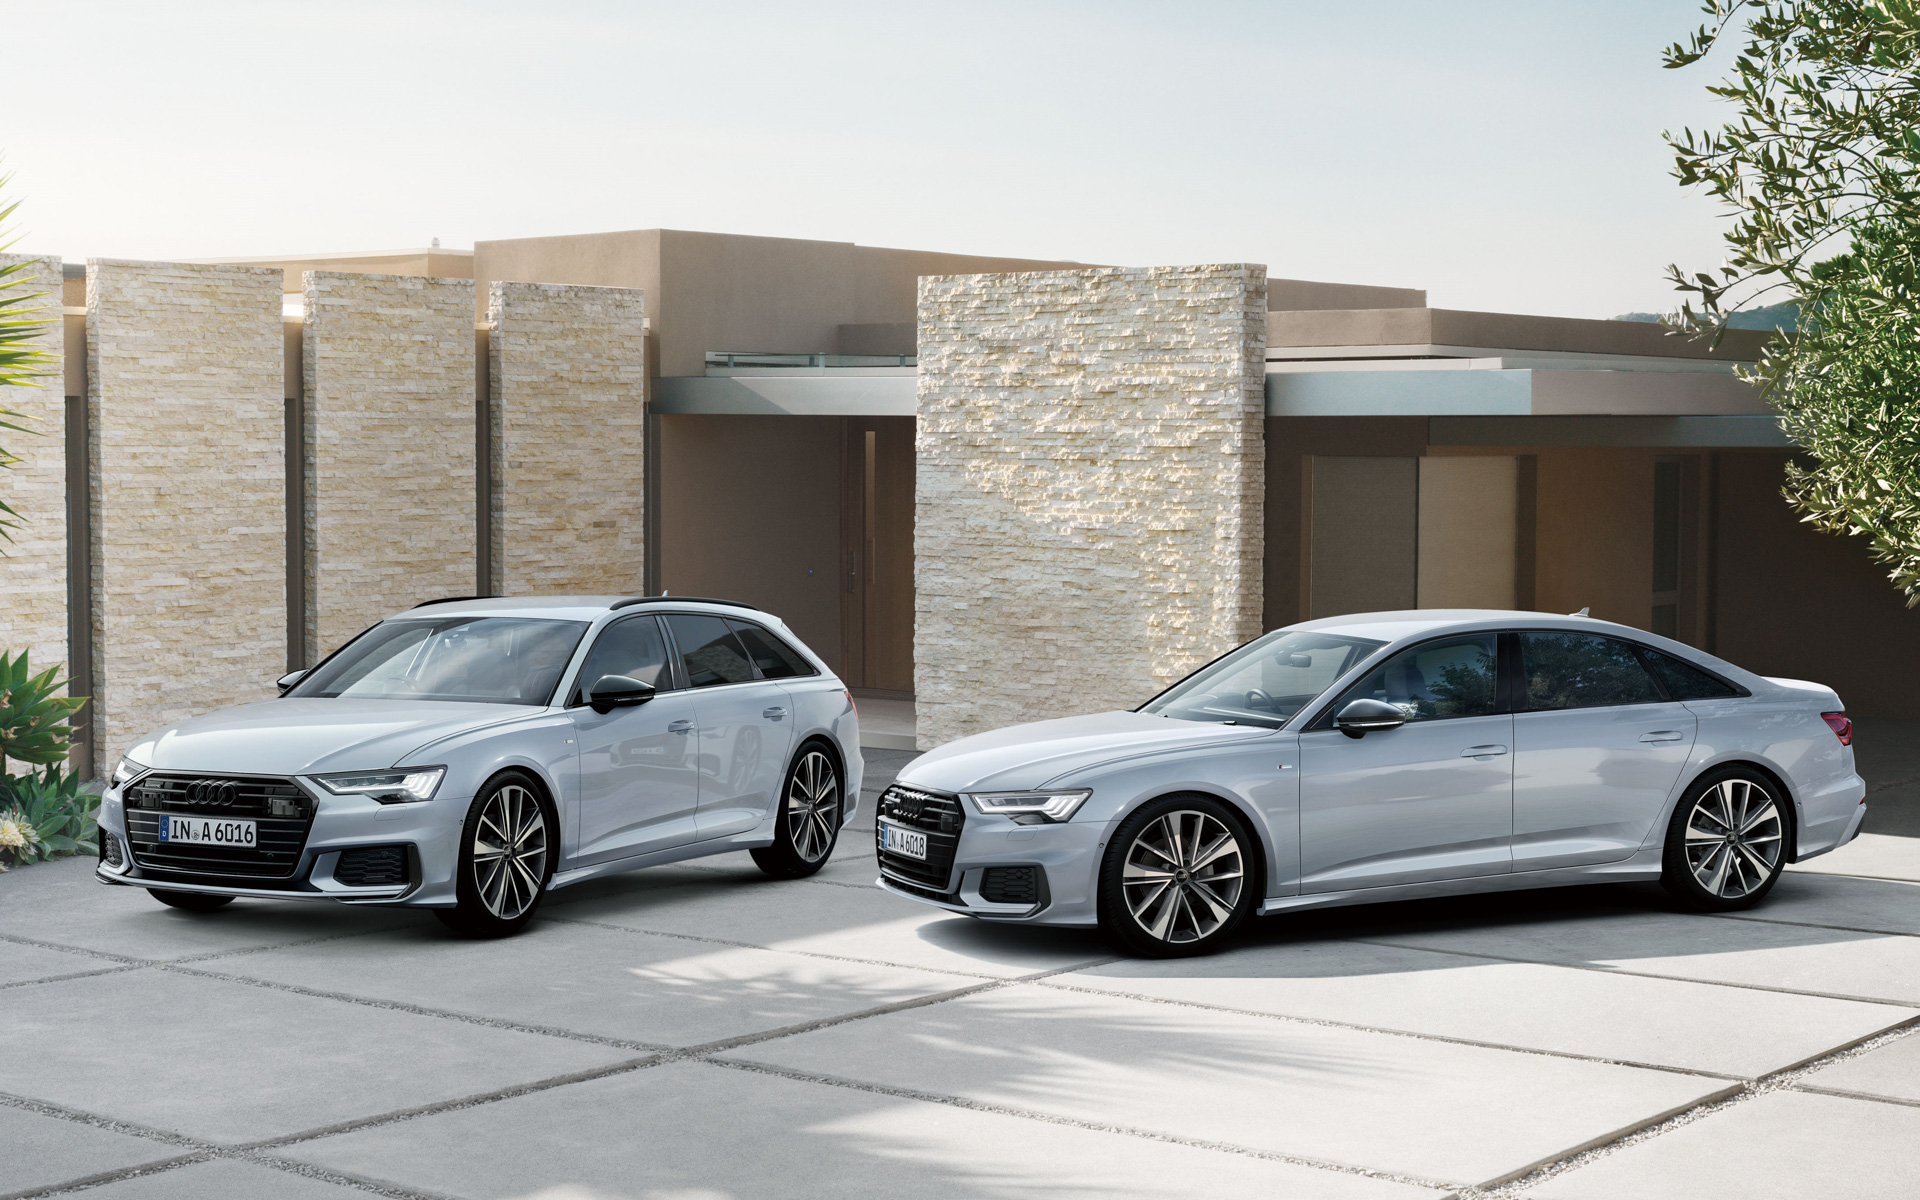 Audi Japan Releases Limited Edition Black Style PLUS: A6 Avant, A6, and A7 Sportback